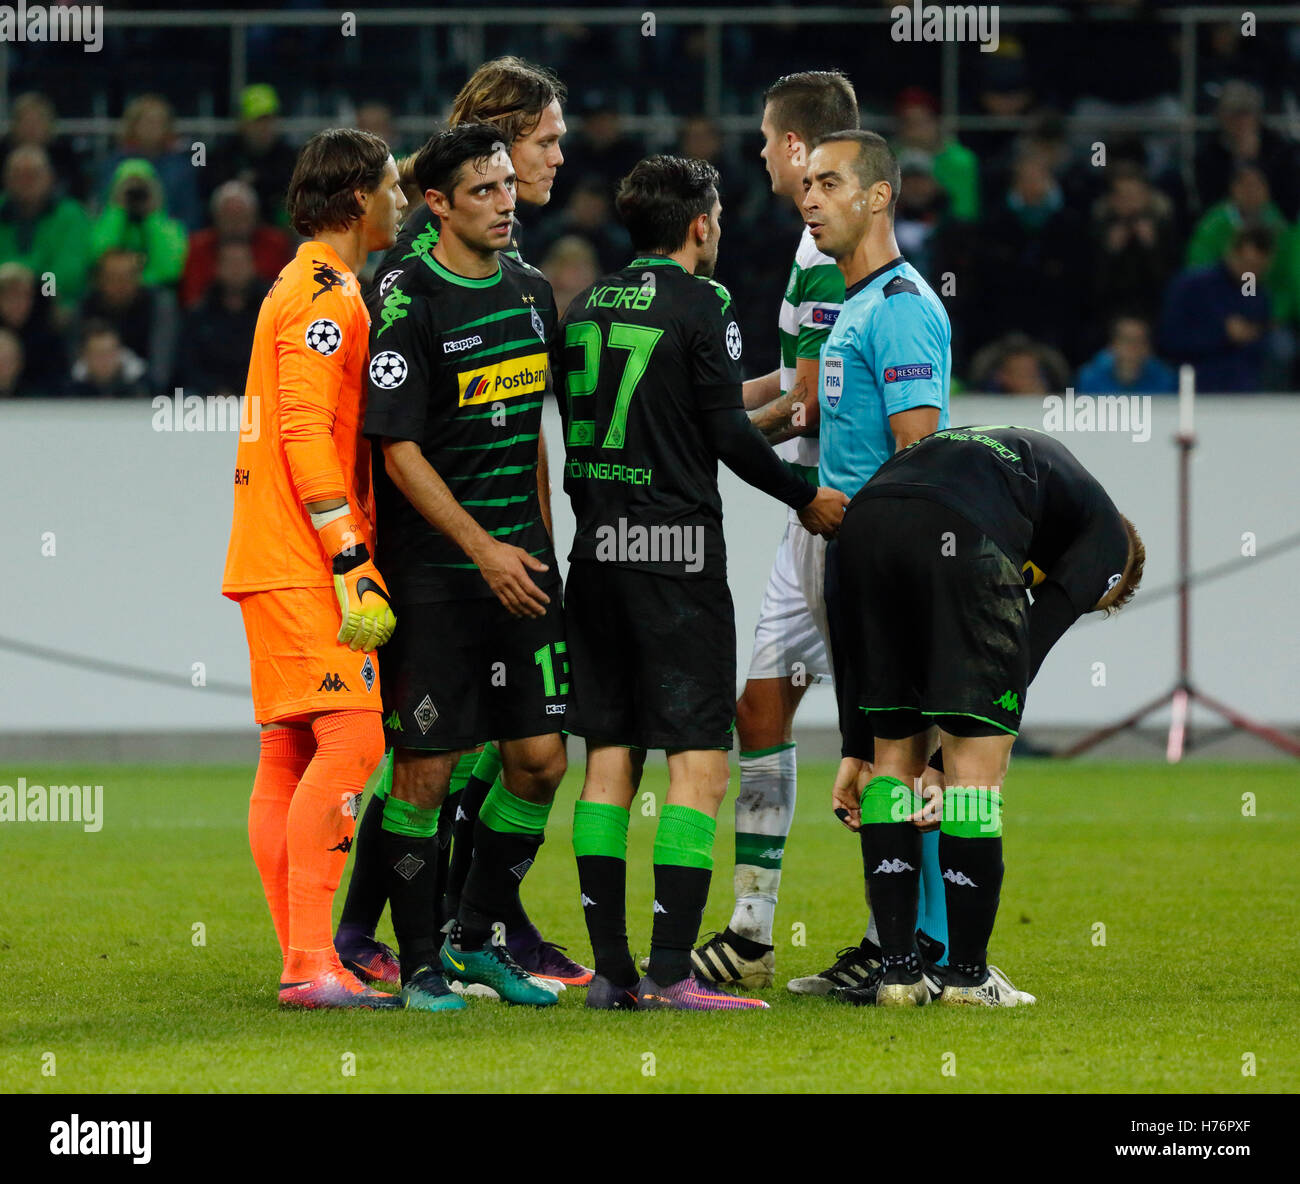 sports, football, UEFA Champions League, 2016/2017, Group Stage, Group C, Matchday 4, Borussia Moenchengladbach versus Celtic FC Glasgow 1:1, Stadium Borussia Park, Gladbach players discuss sending-off to Julian Korb (MG) 27 and the foul penalty with referee Manuel De Sousa from Portugal (right), f.l.t.r. keeper Yann Sommer (MG), team captain Lars Stindl (MG), Jannik Vestergaard (MG) Stock Photo